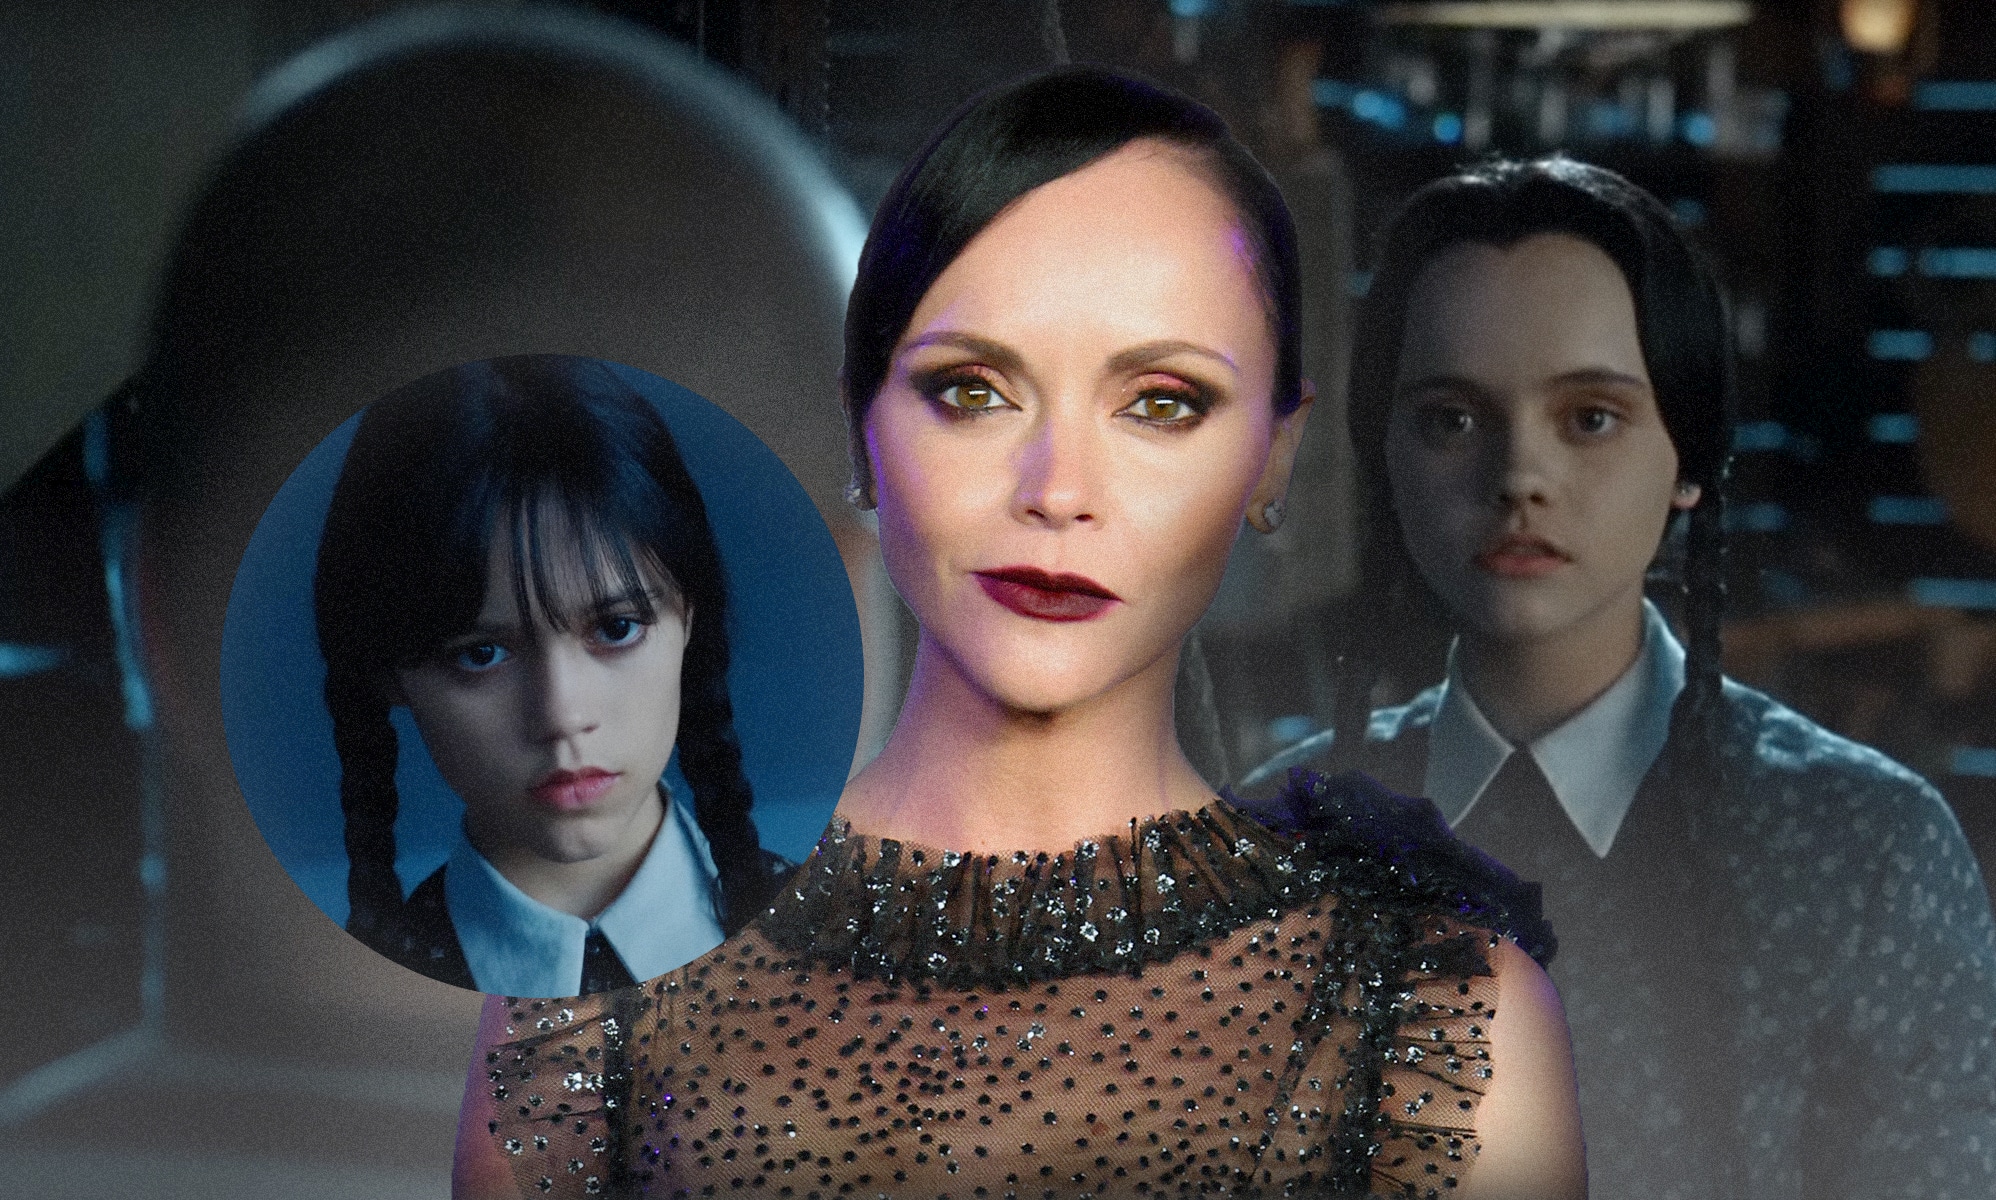 Who Plays Wednesday Addams in 'Wednesday' on Netflix?